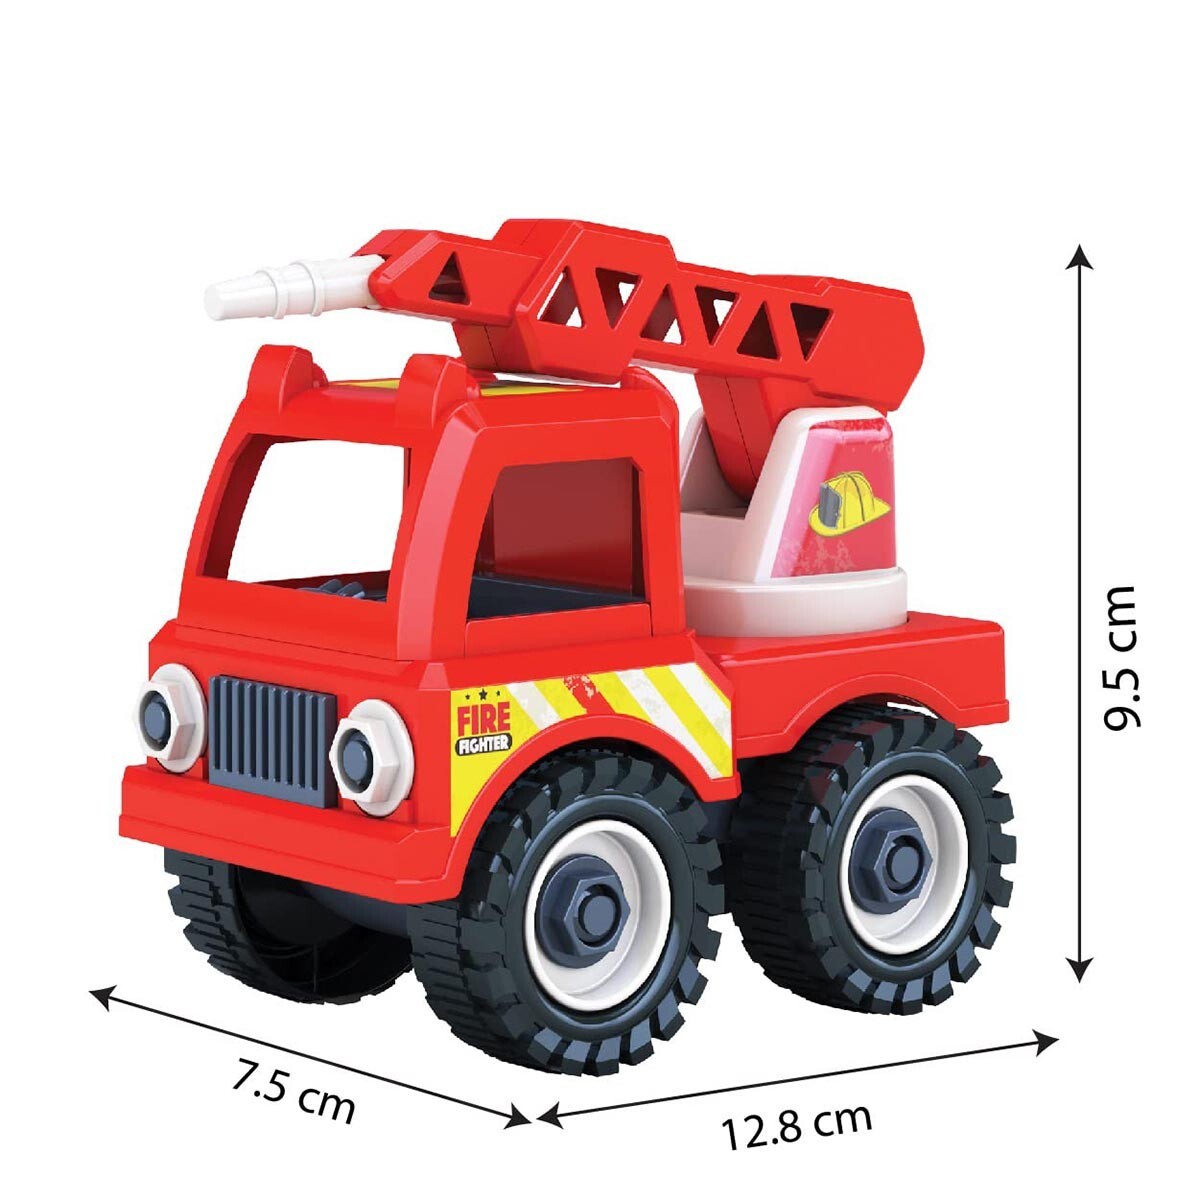 Win Aerial Fire Truck  Mb70008